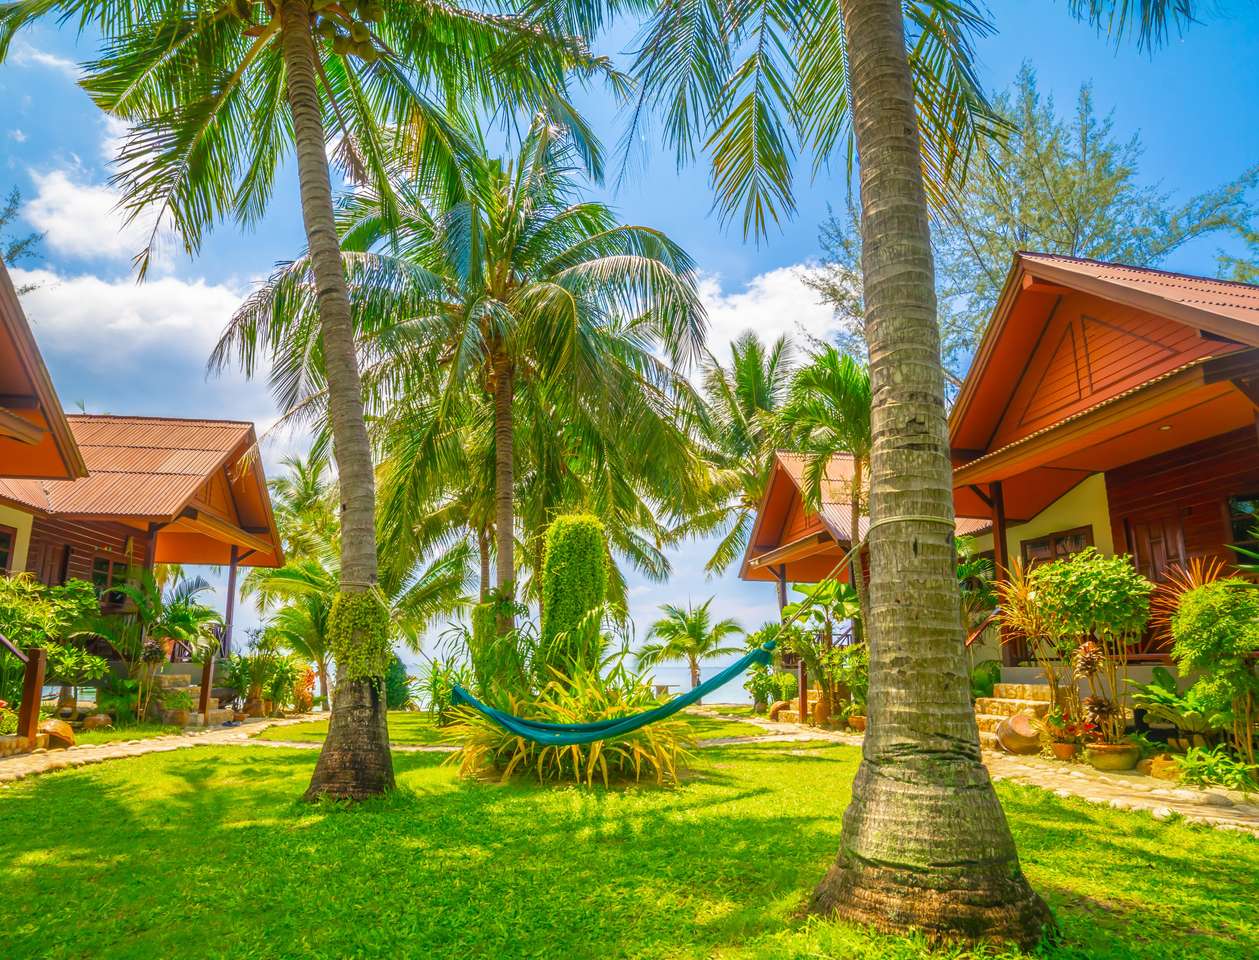 Hammock between two palm trees on the beach jigsaw puzzle online